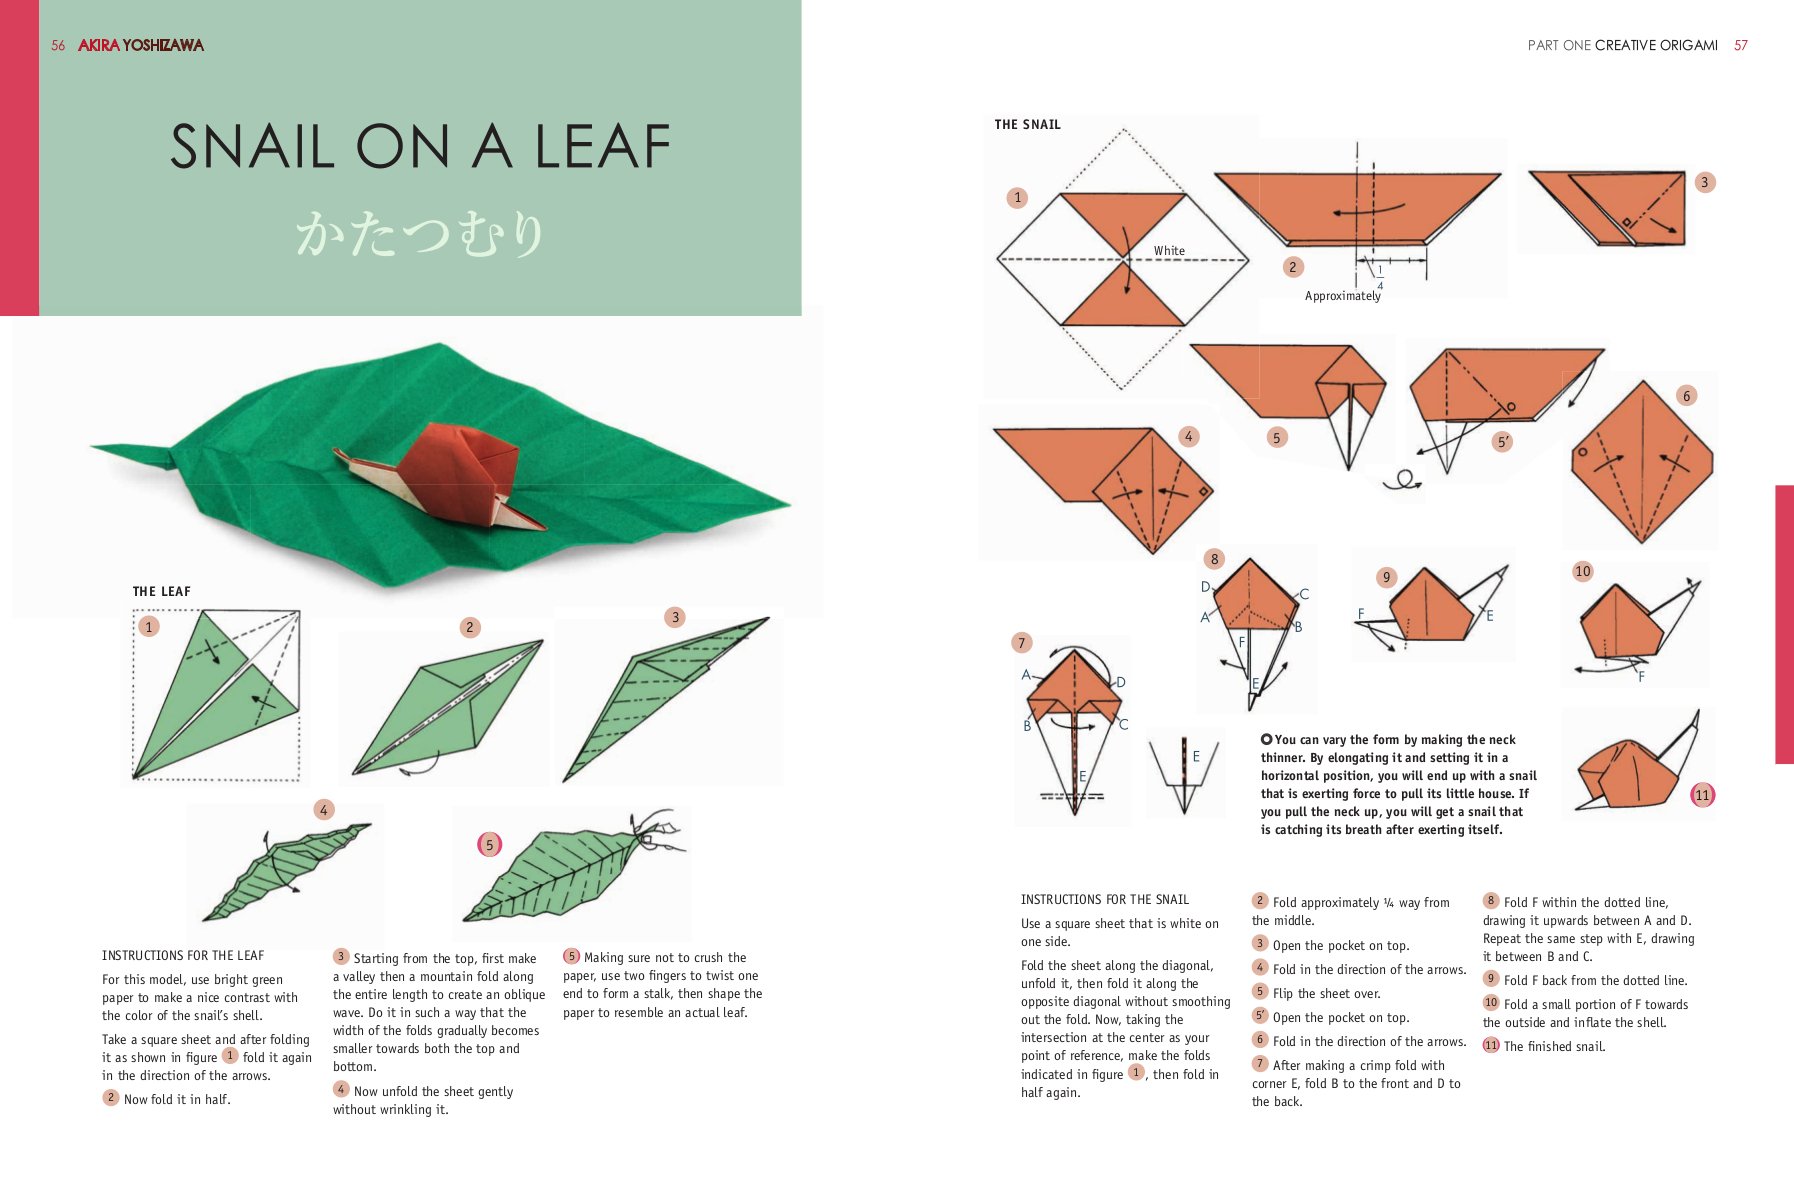 Origami design for a snail and leaf by Akira Yoshizawa